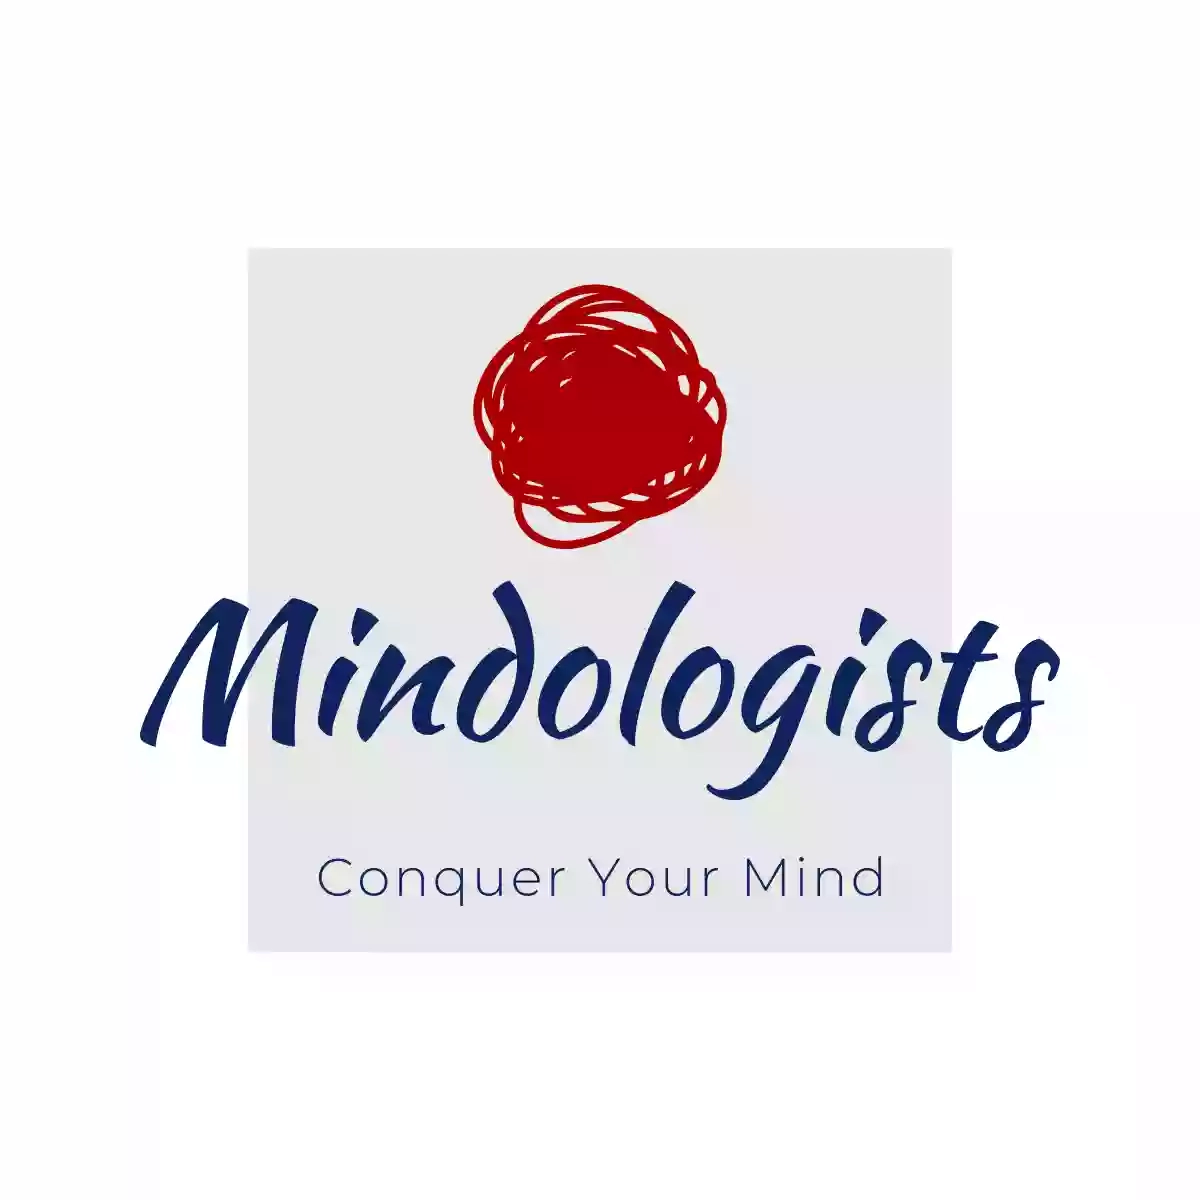 Mindologists Performance Specialists In Sport & Business